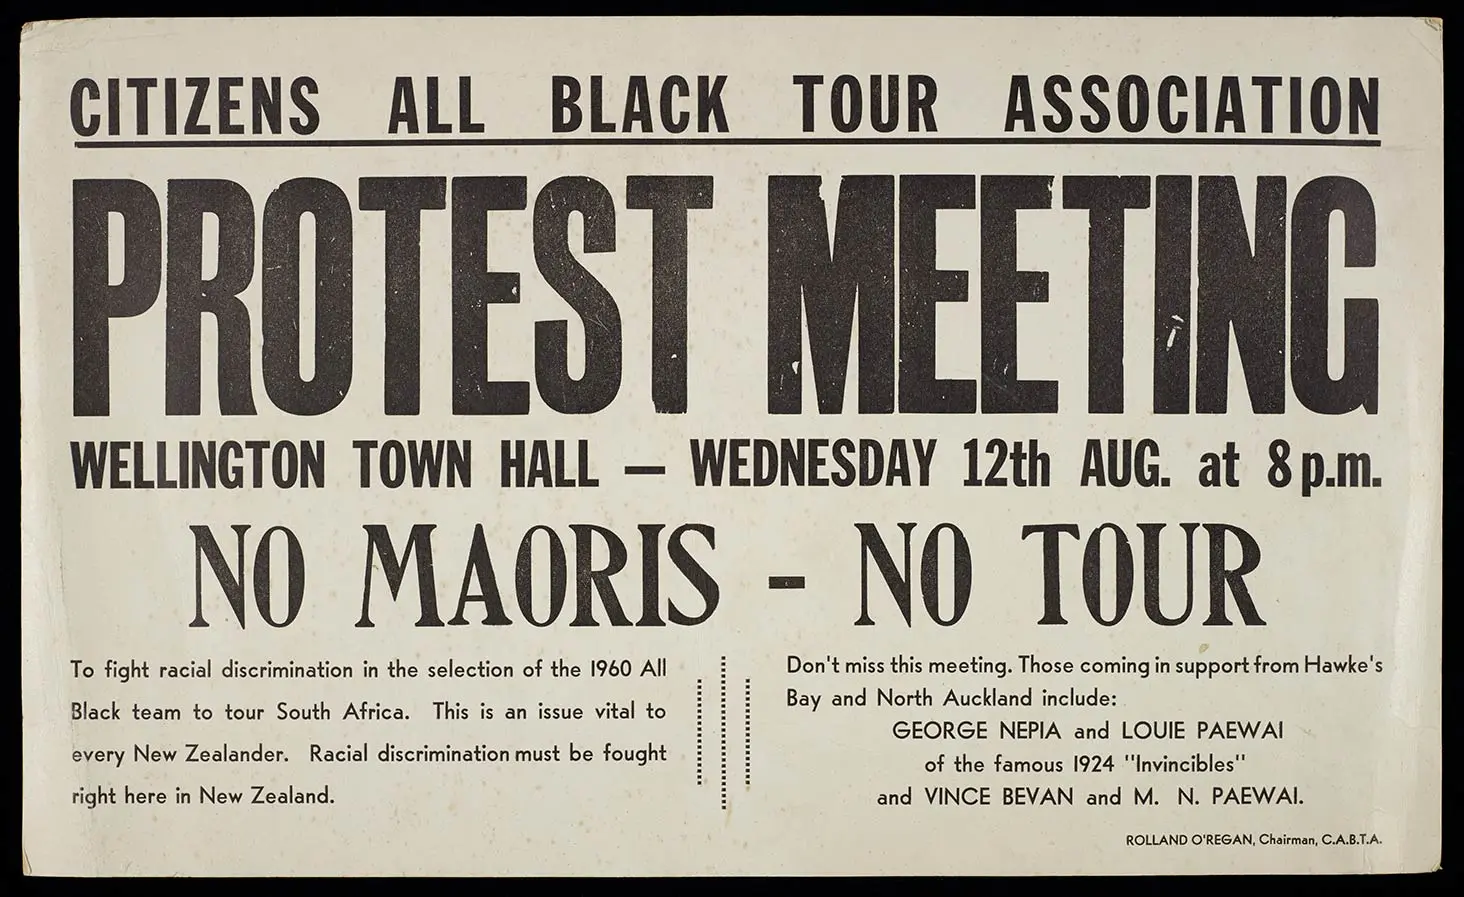 Handbill for Citizens All Black Tour Association protest meeting at Wellington Town Hall Wednesday 12 August.